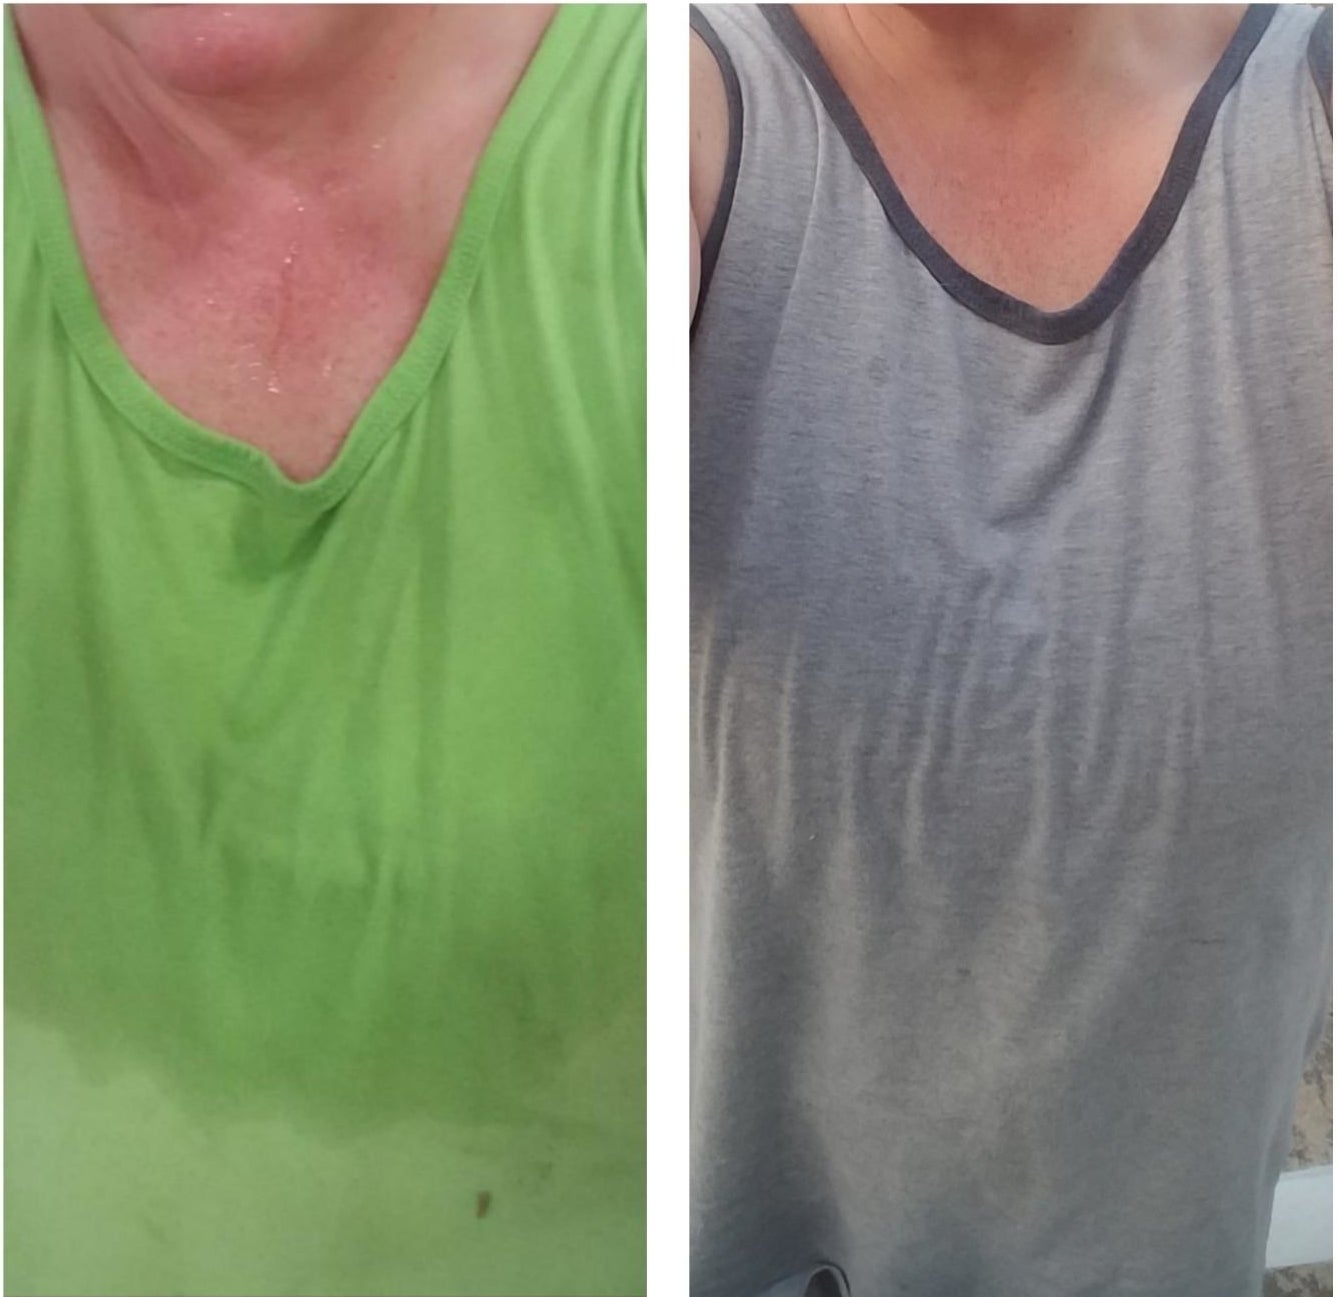 reviewer showing how sweaty they were in a green shirt and then after using the wipes with no sweat in a grey shirt